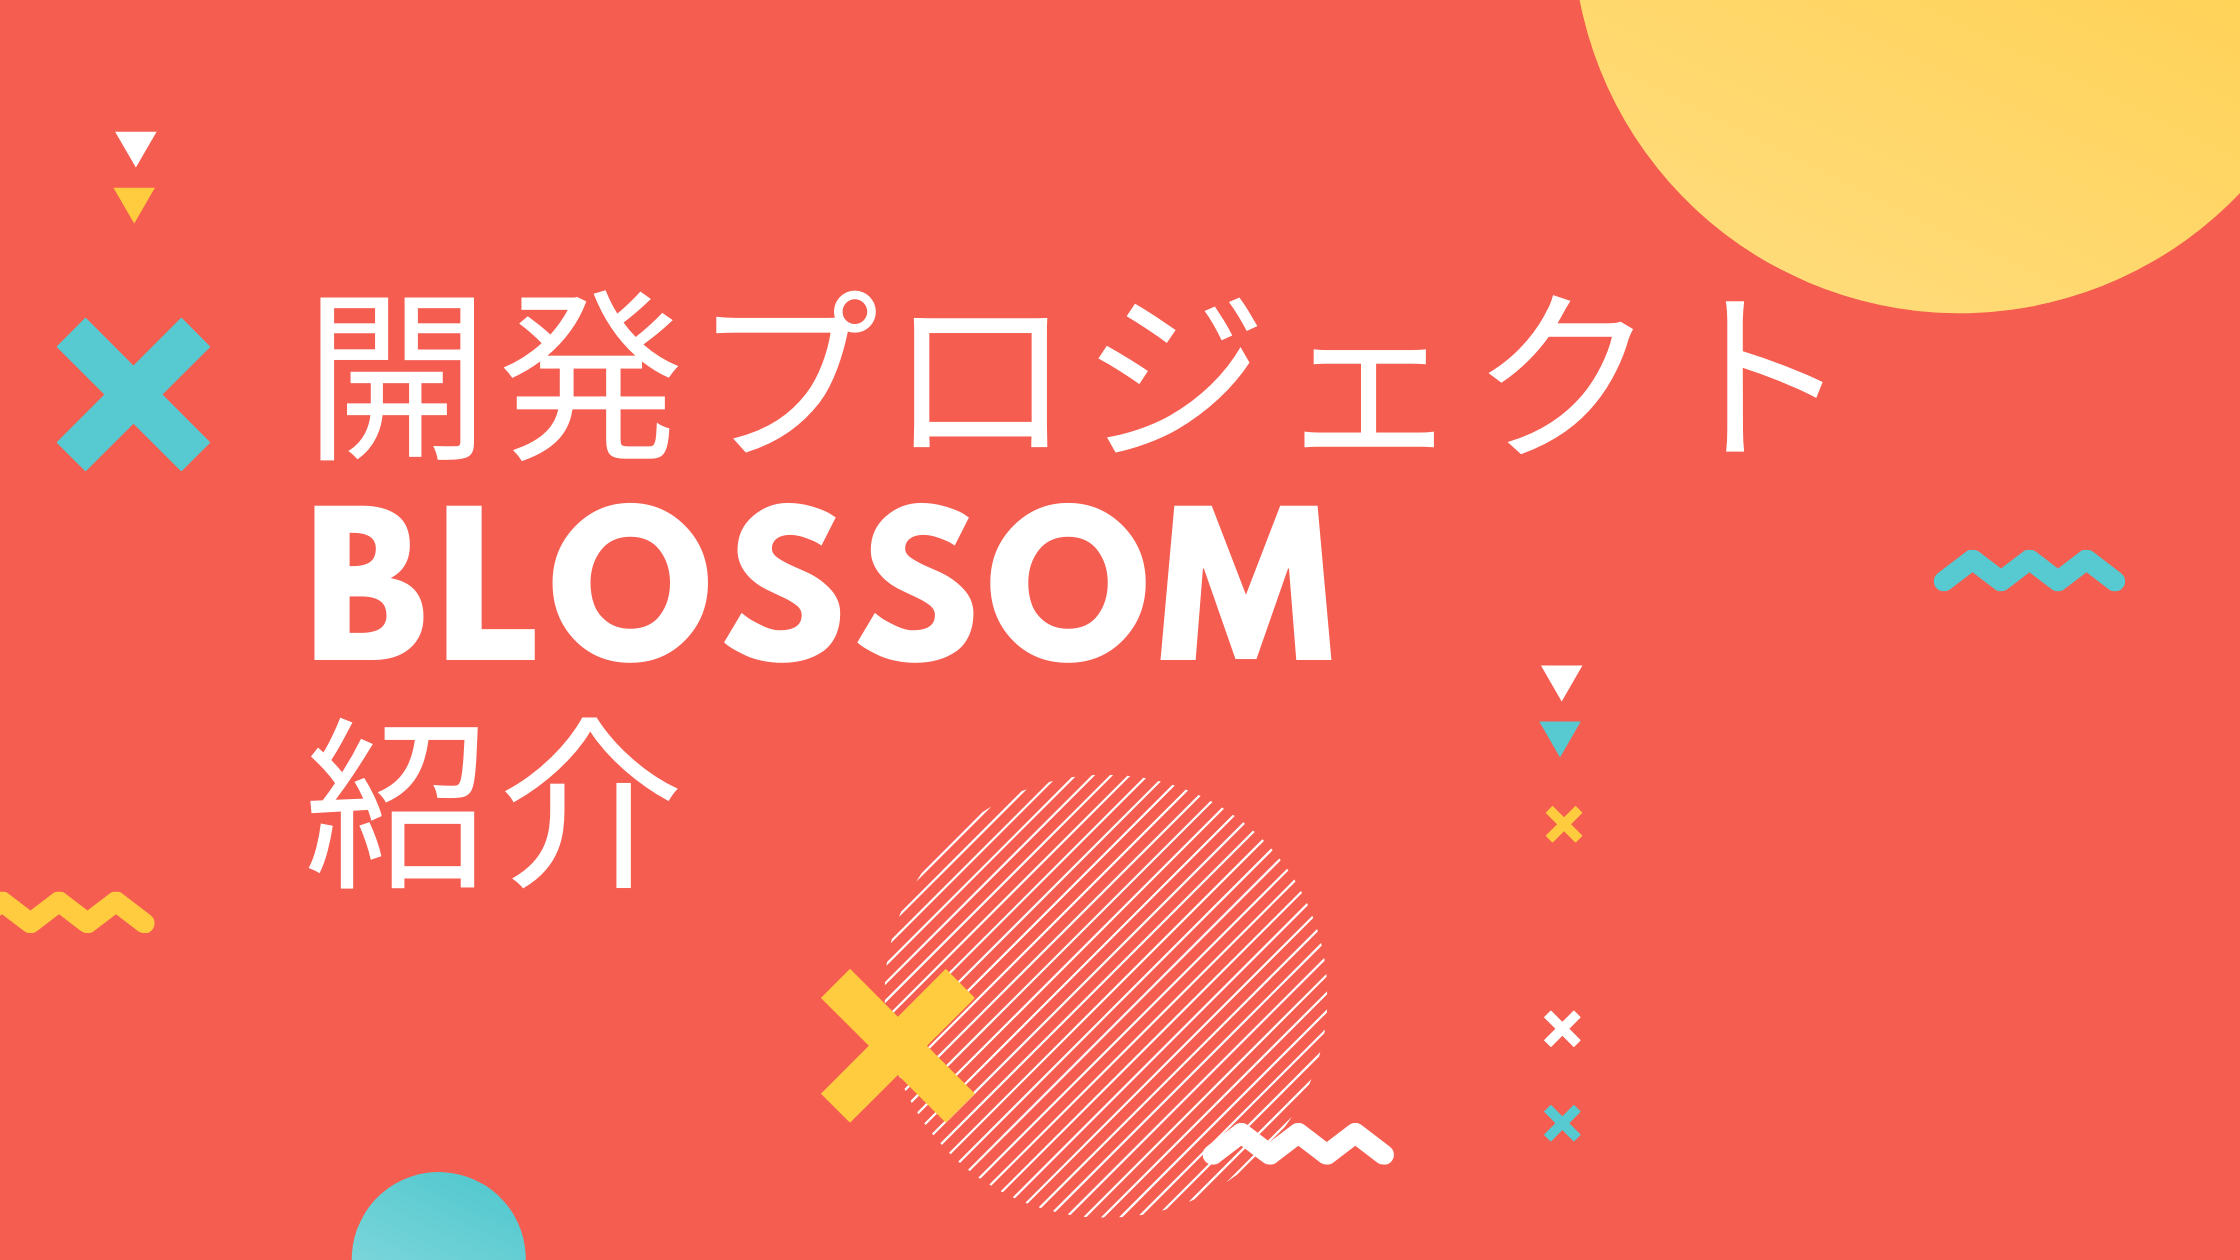 You are currently viewing 社内開発プロジェクトBlossom紹介